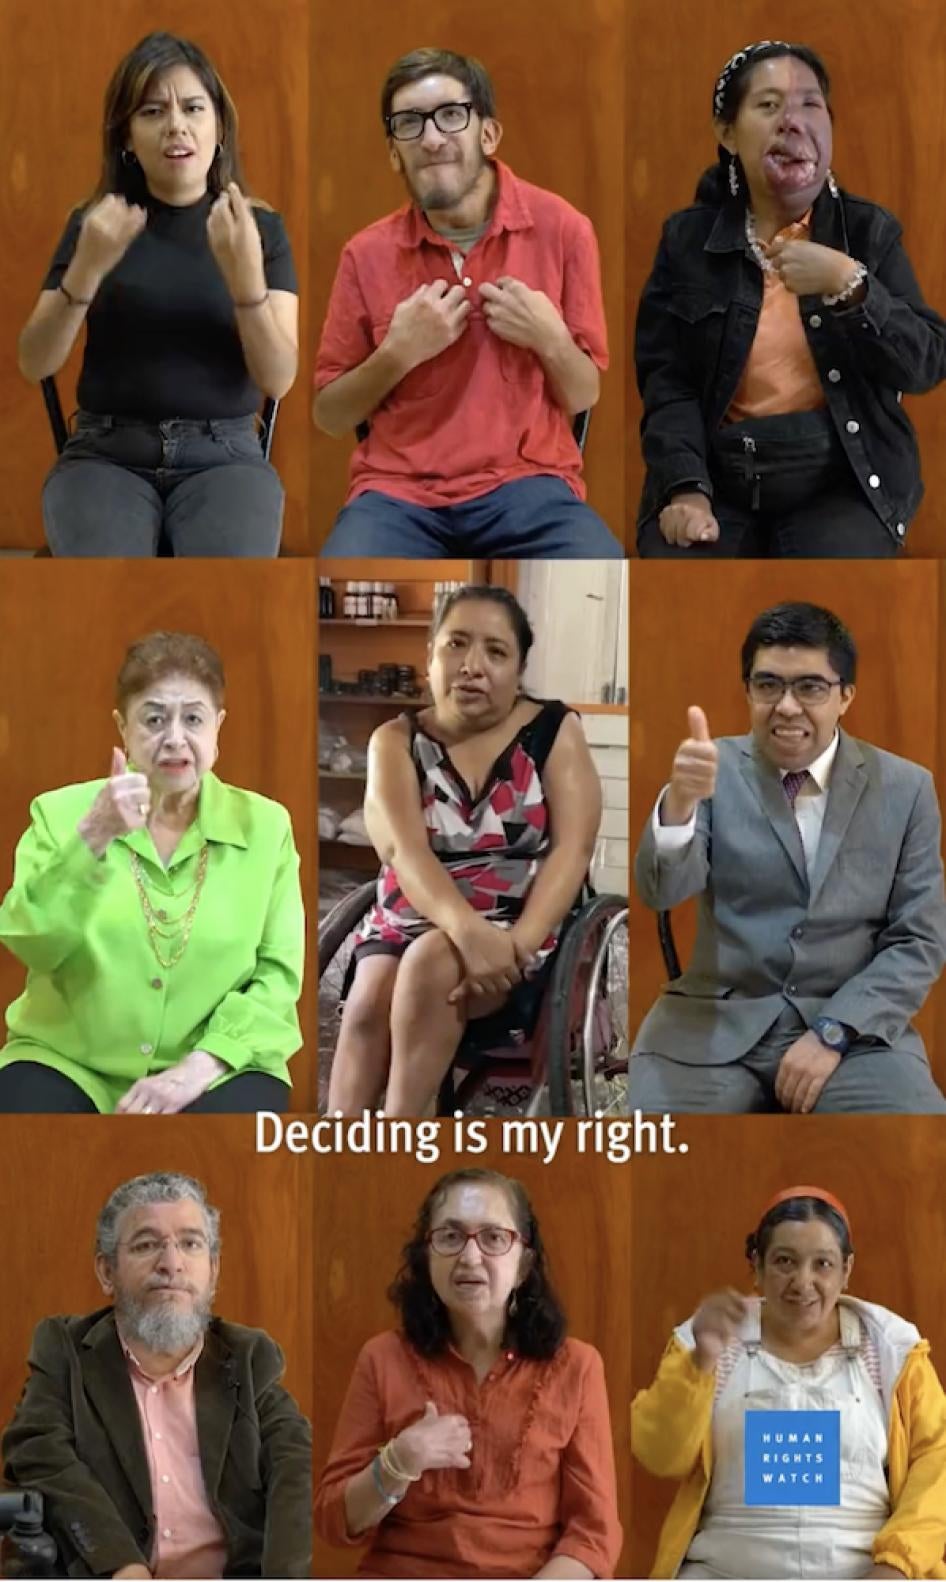 New legislation in Mexico ensures every adult, including people with disabilities and older persons, has the right to make decisions about their own life.